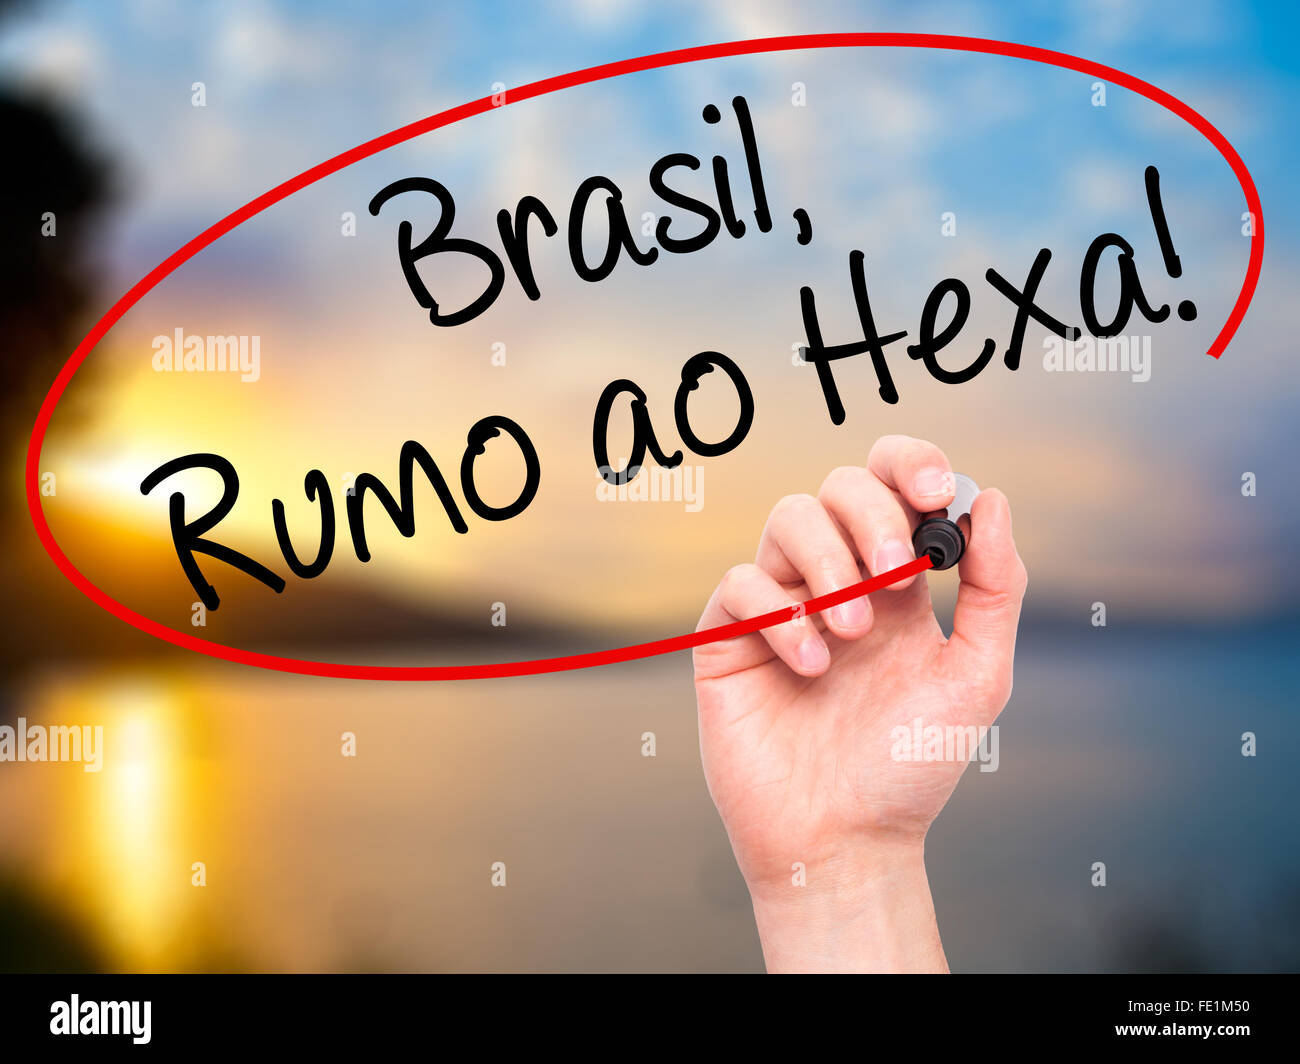 Man Hand writing Brasil, Rumo ao Hexa! with black marker on visual screen. Isolated on background. Business, technology, interne Stock Photo